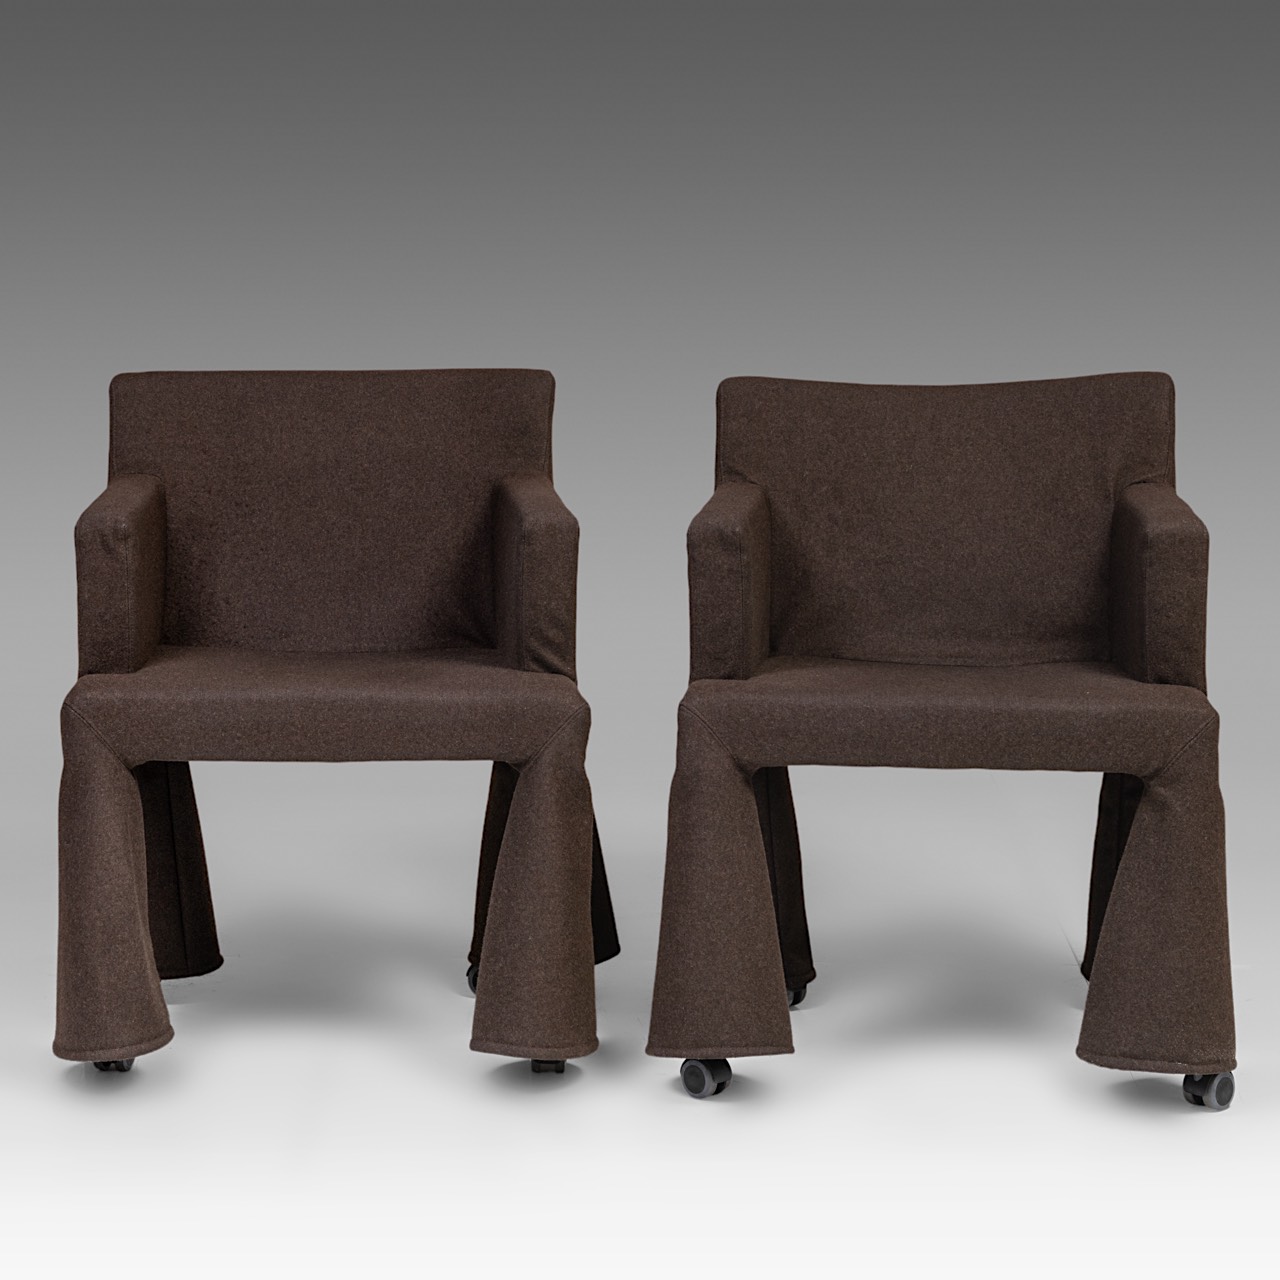 A pair of 'VIP' chairs by Marcel Wanders, the Netherlands, 2000, H 82 - W 60 cm - Image 3 of 9